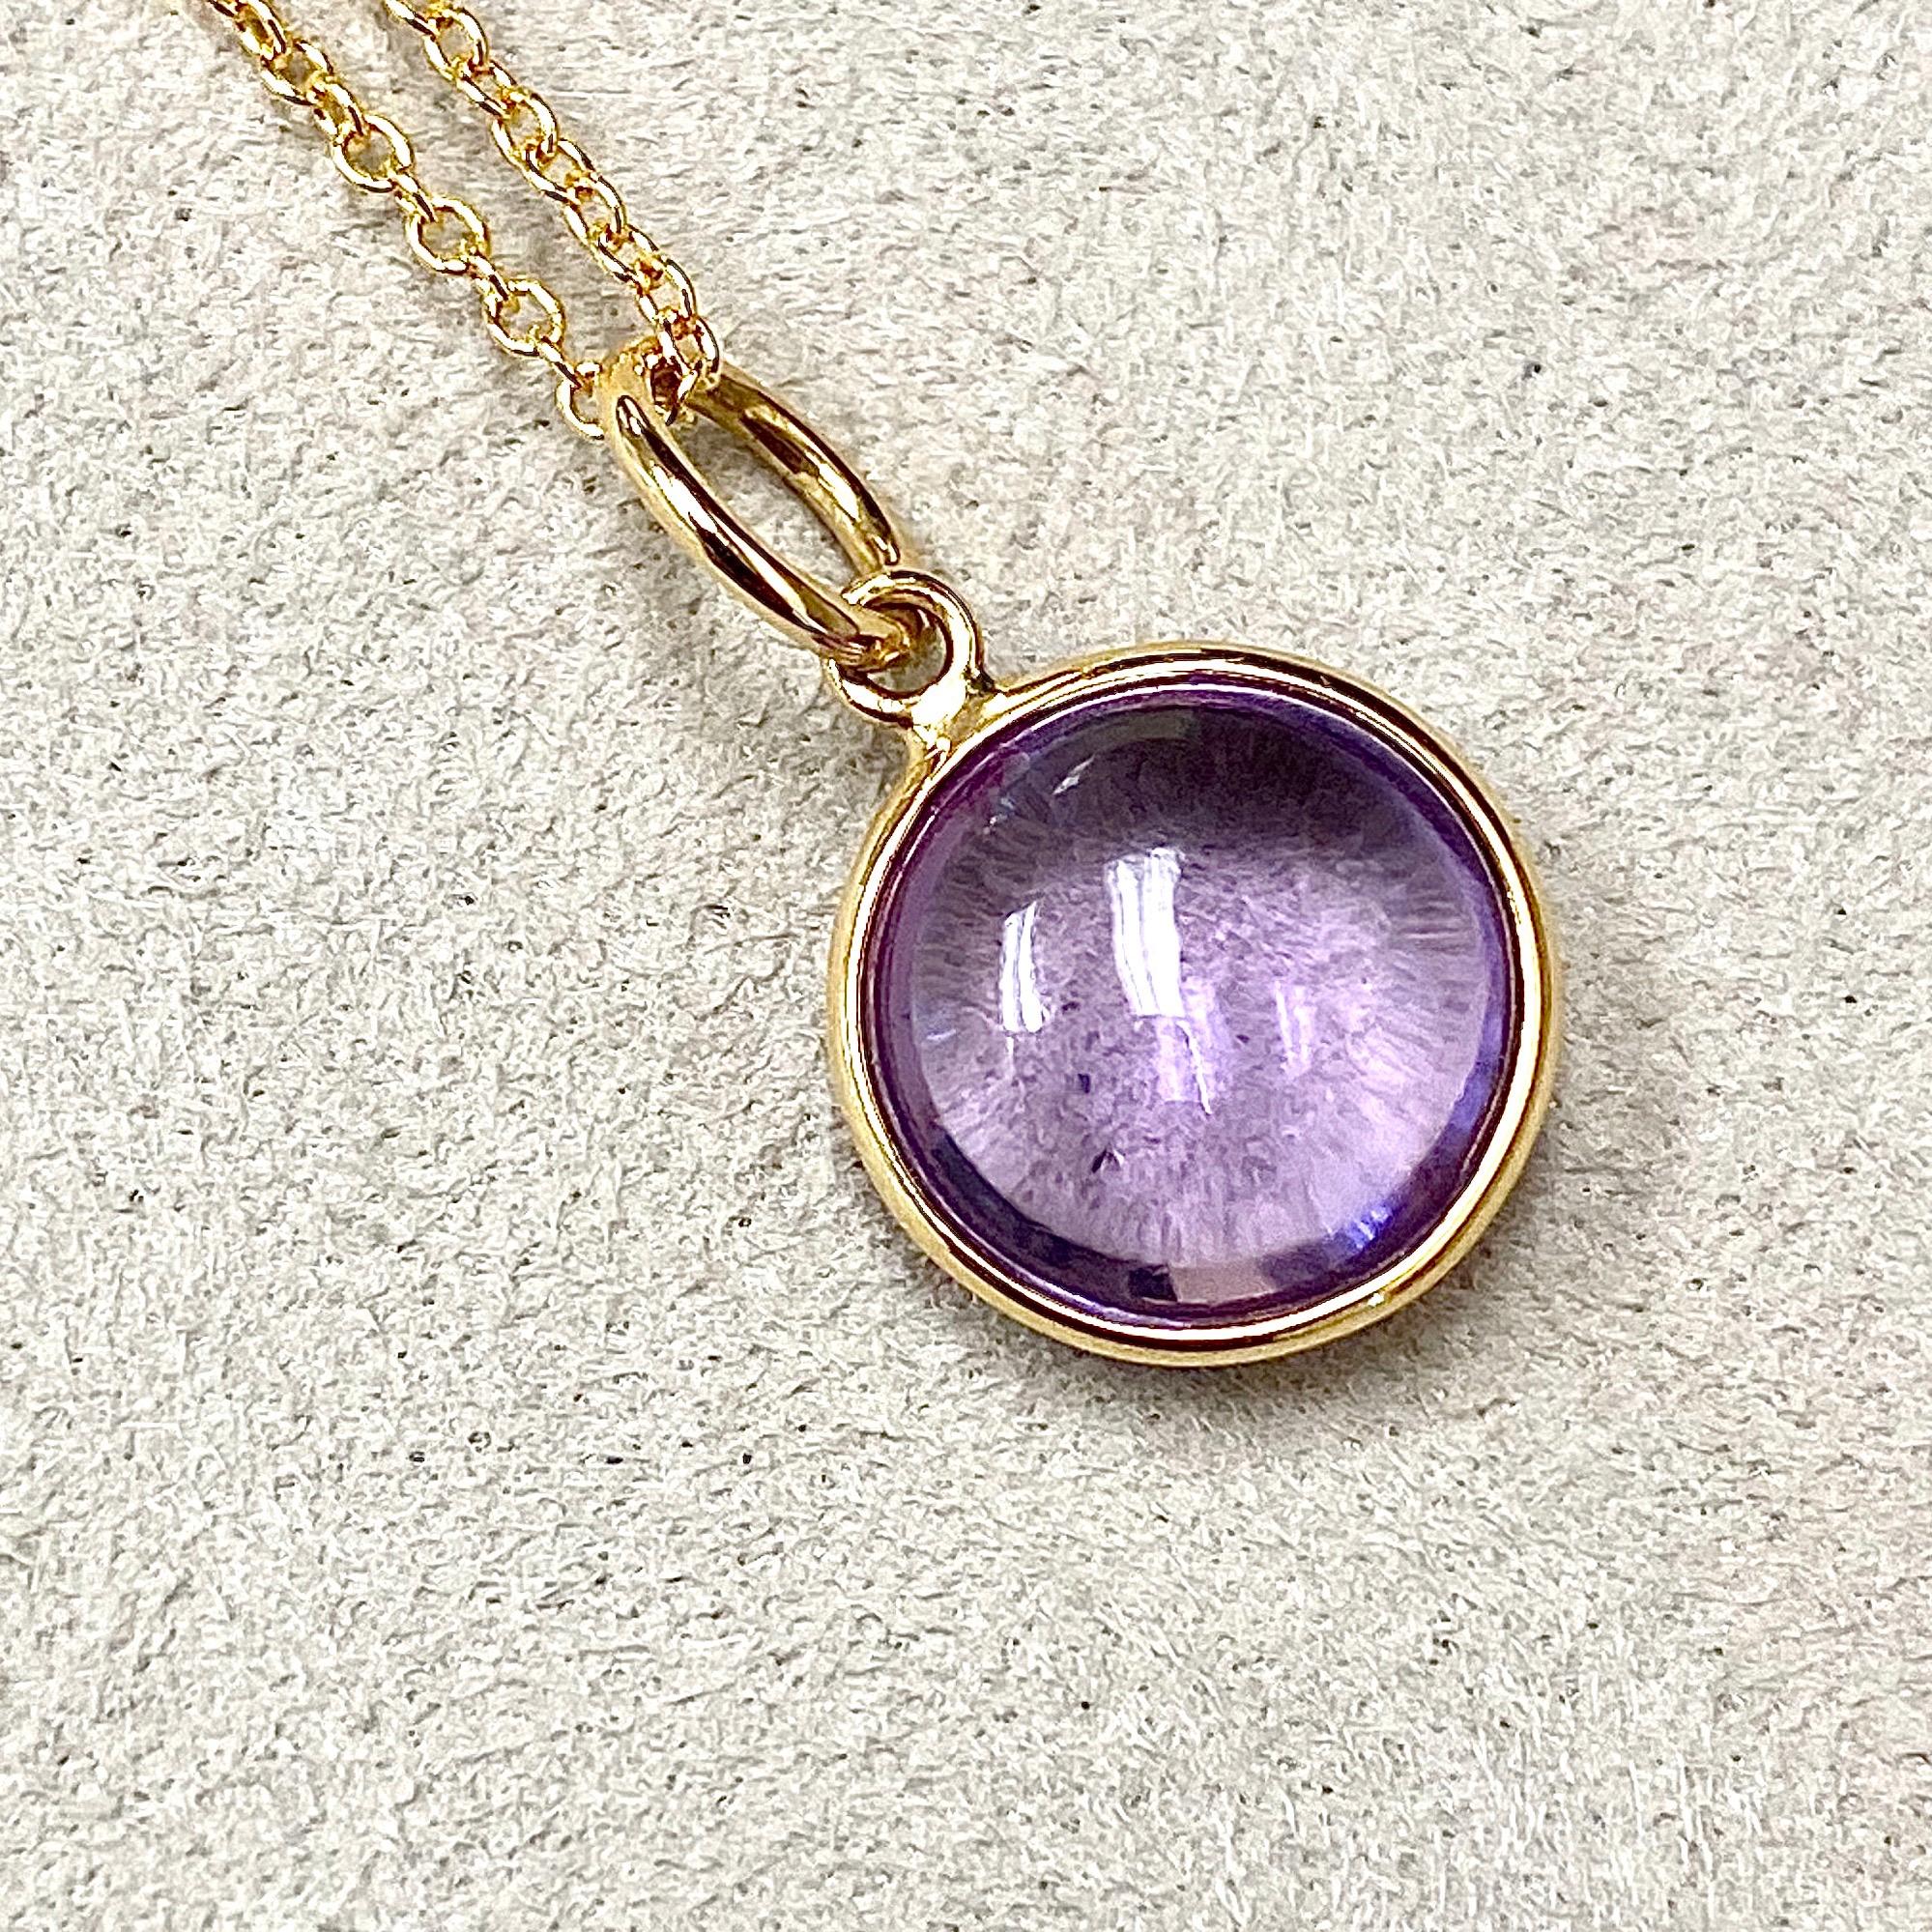 Created in 18 karat yellow gold
10 mm size charm
Amethyst 3.5 cts approx
February birthstone
Chain sold separately 

Crafted from luxurious 18 karat yellow gold, this regal pendant has an impressively large 10 mm size charm. The mesmerizing